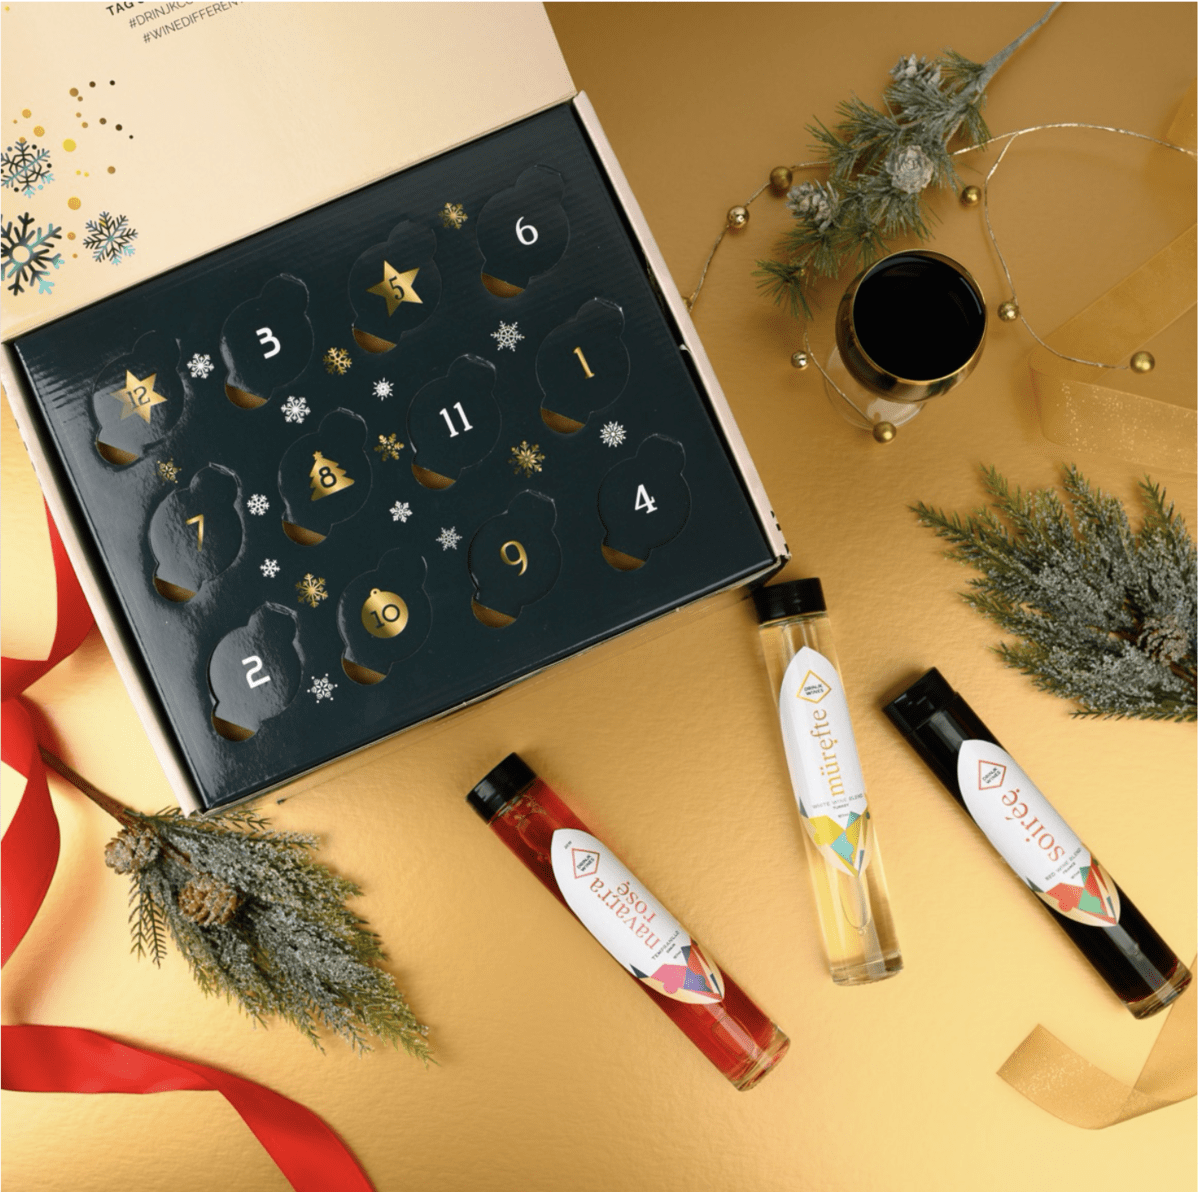 Drinjk’s Wine Advent Calendar – Now Available for Pre-Order!